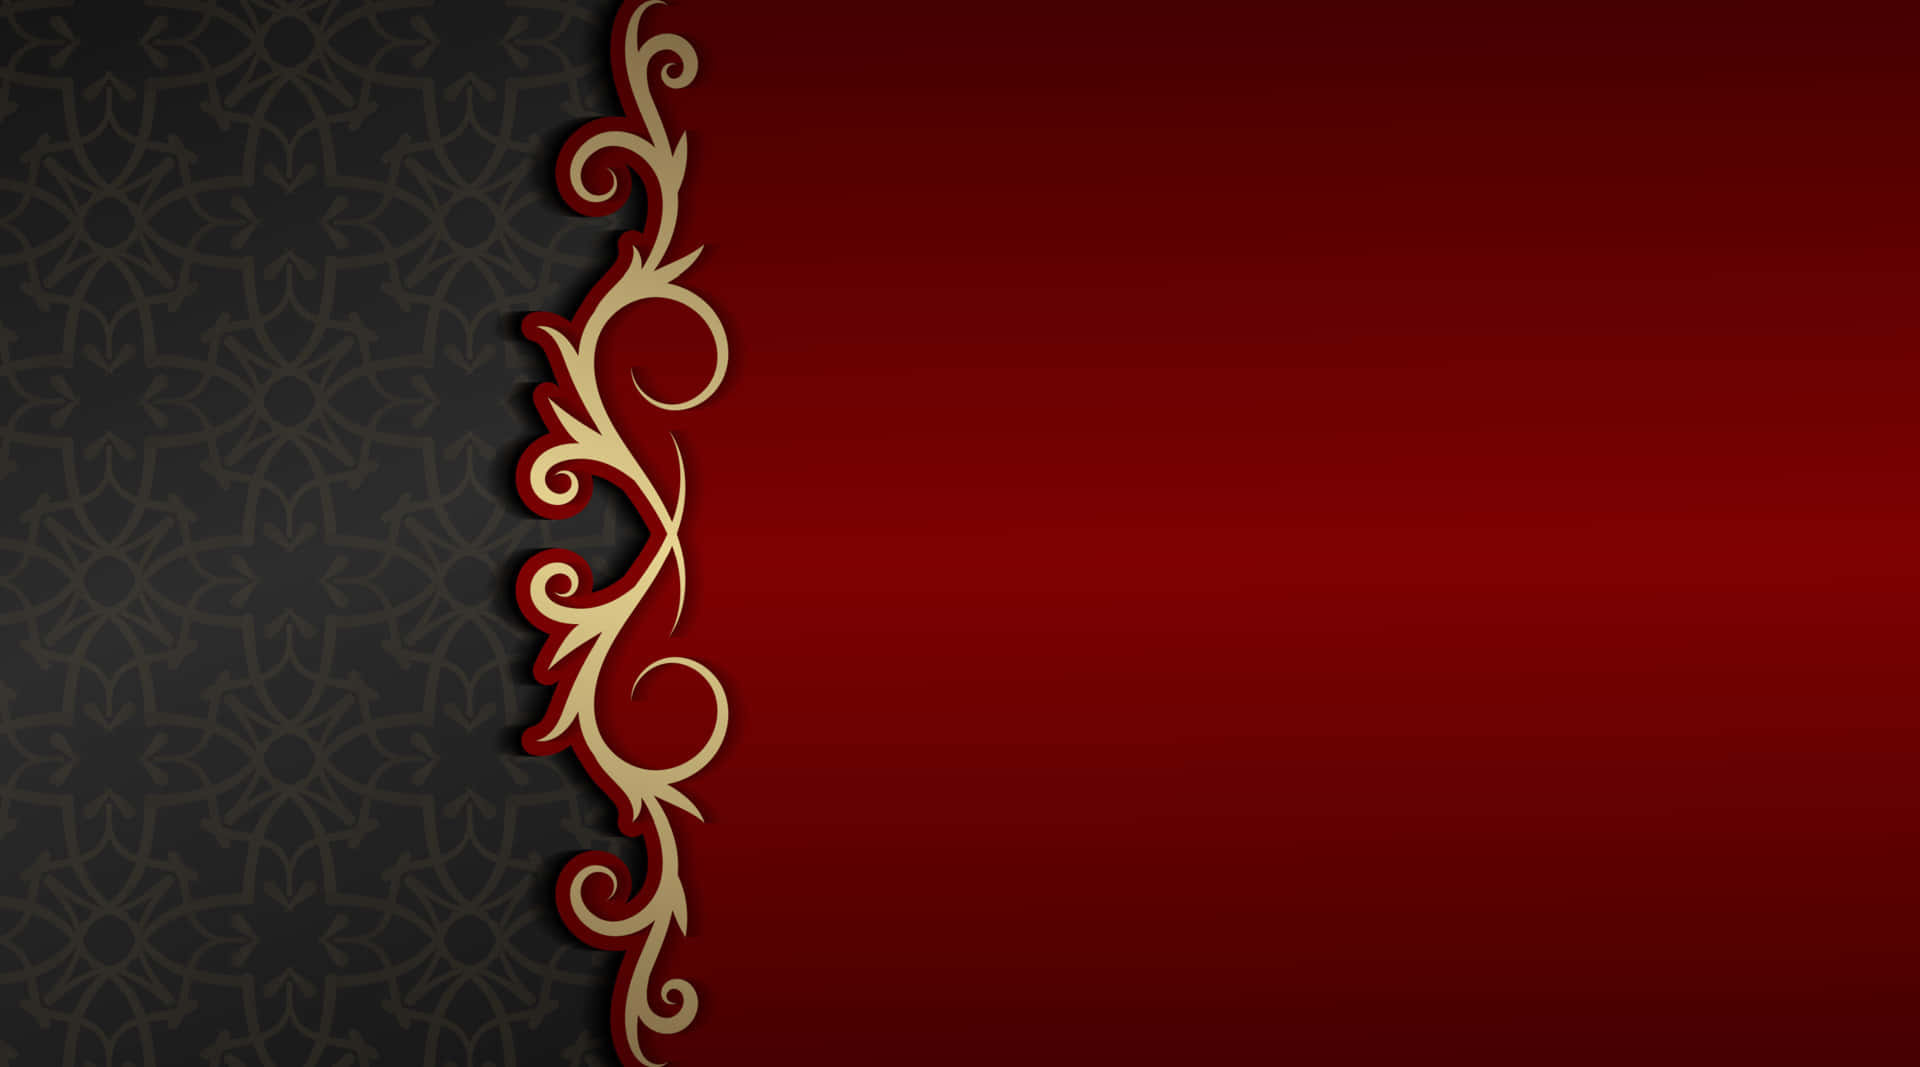 Red And Black Background With Gold Ornaments